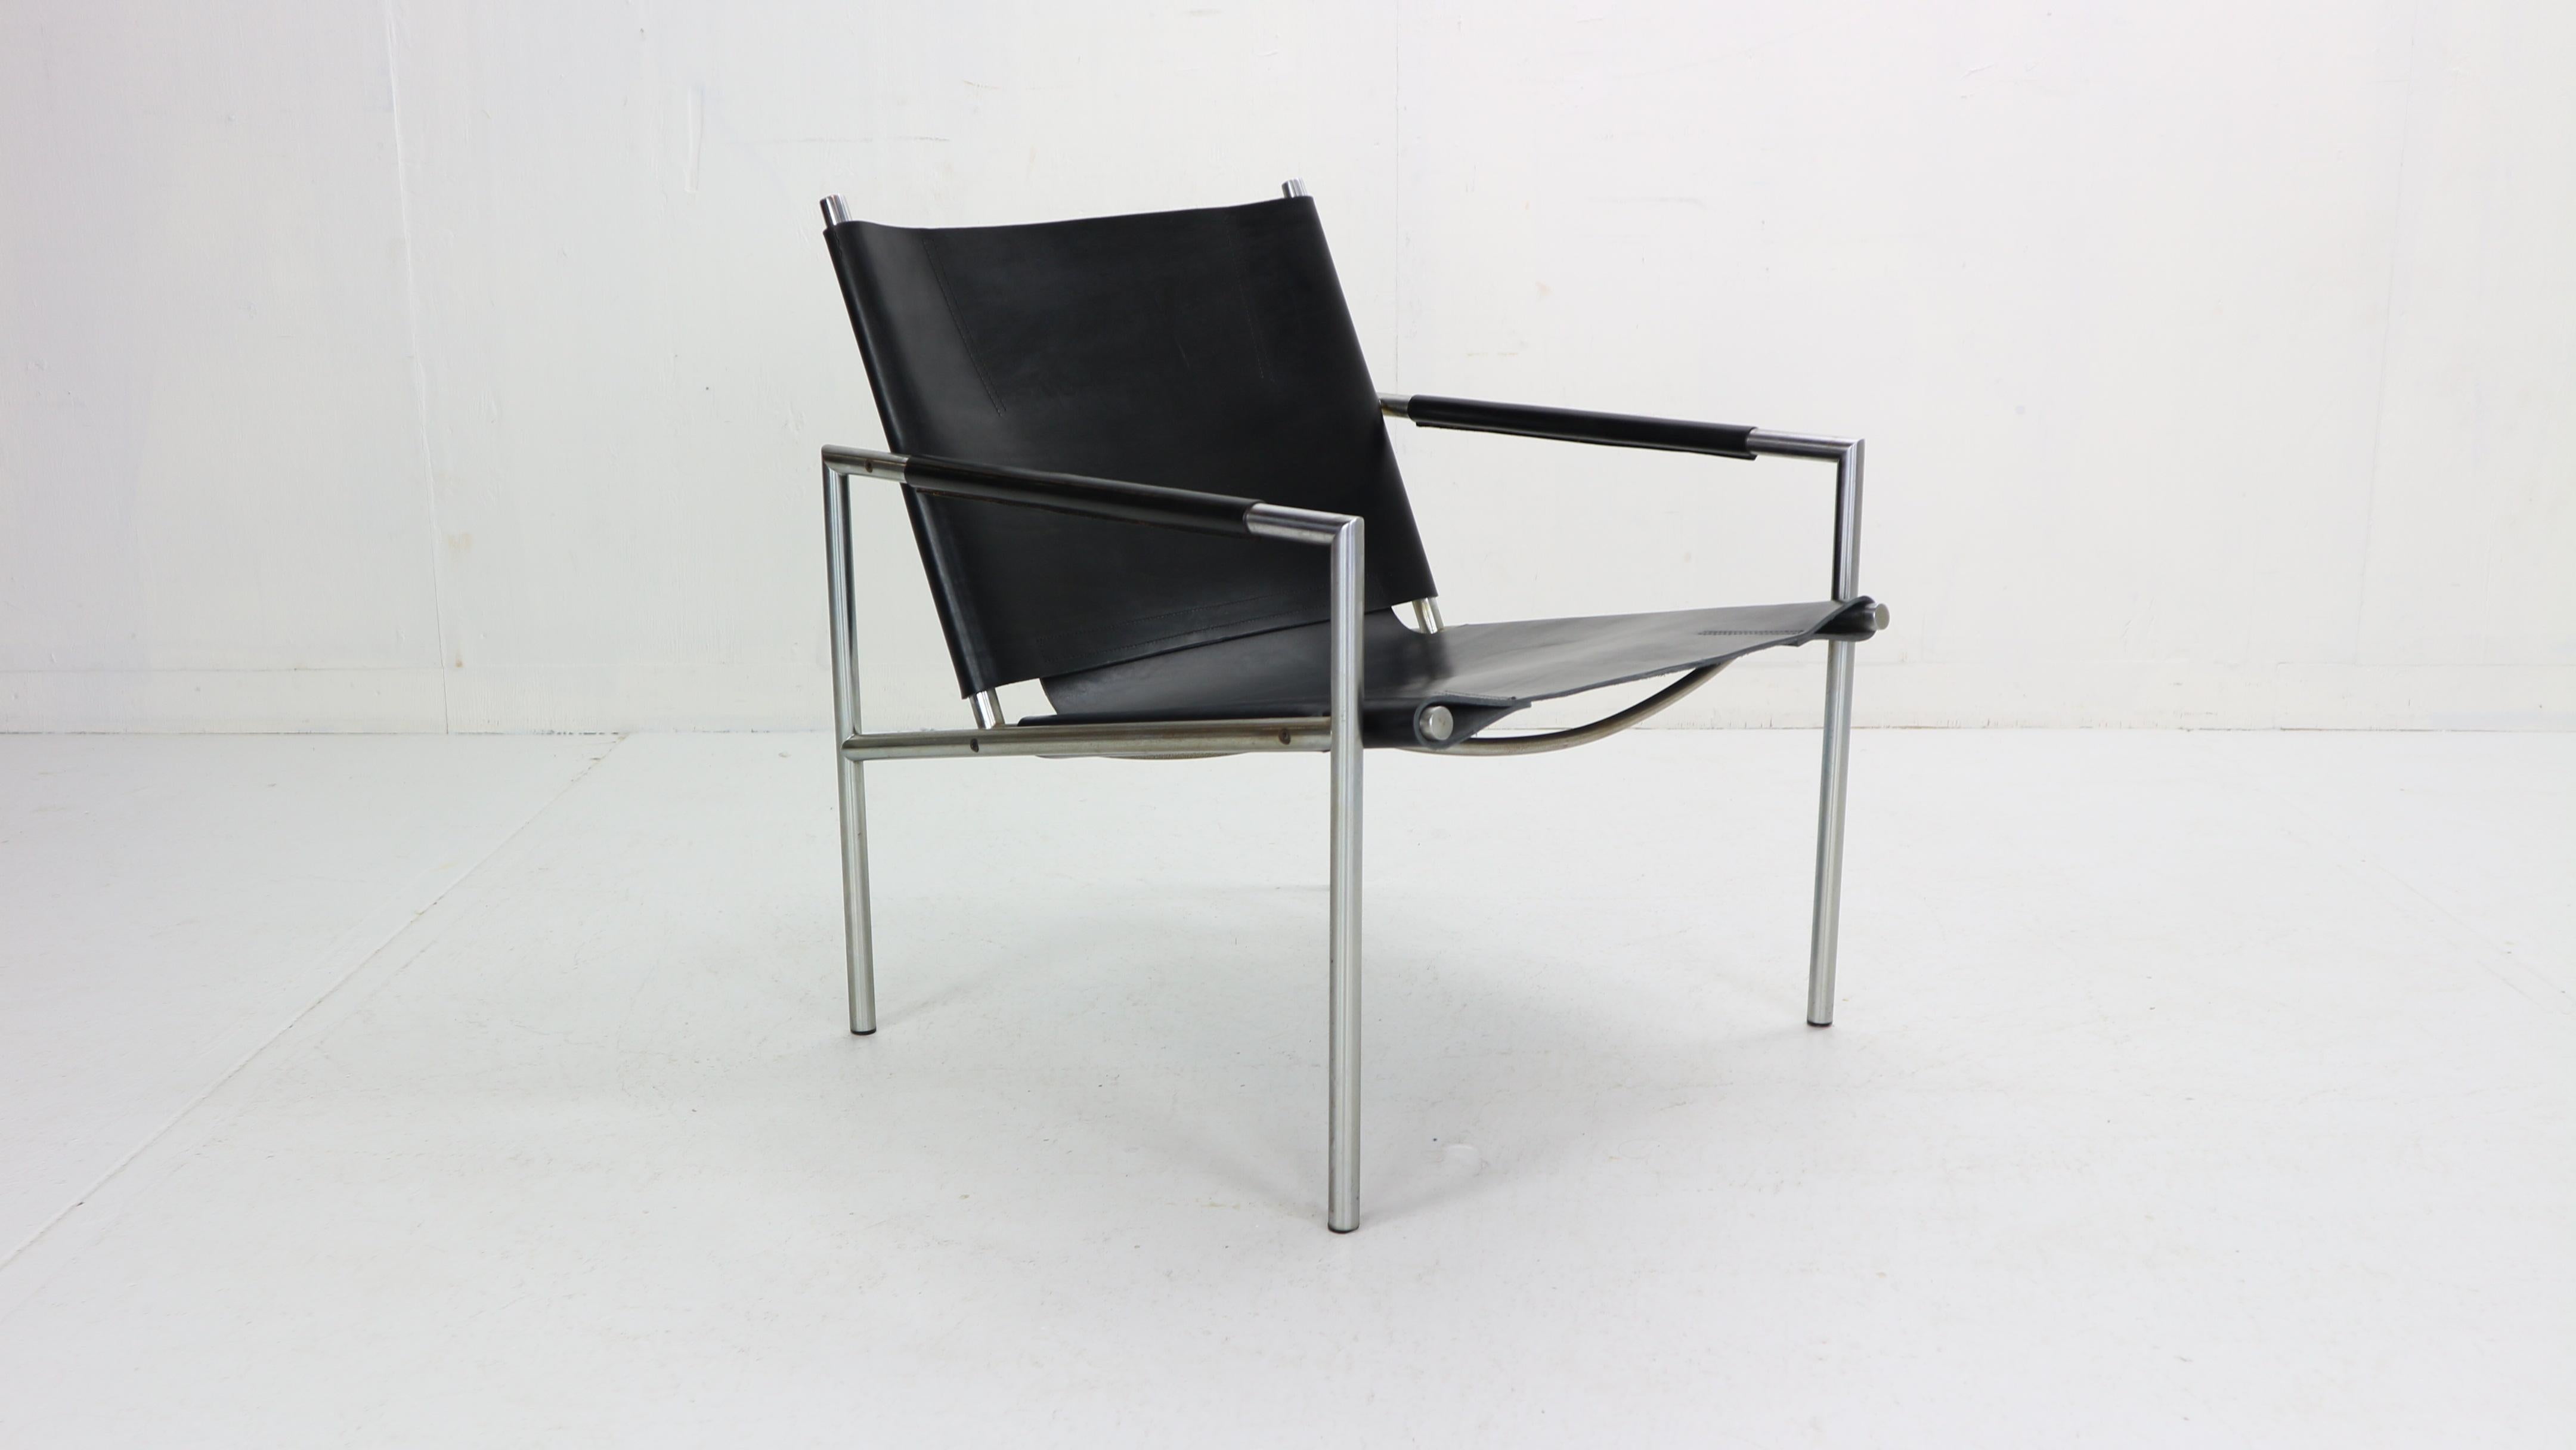 Model SZ02 armchair by Dutch designer Martin Visser designed for ’t Spectrum in 1965. 
The chair is executed in a black colour saddle leather and has leather upholstered armrest. 
The piece has great detailing of the saddle leather sling in the